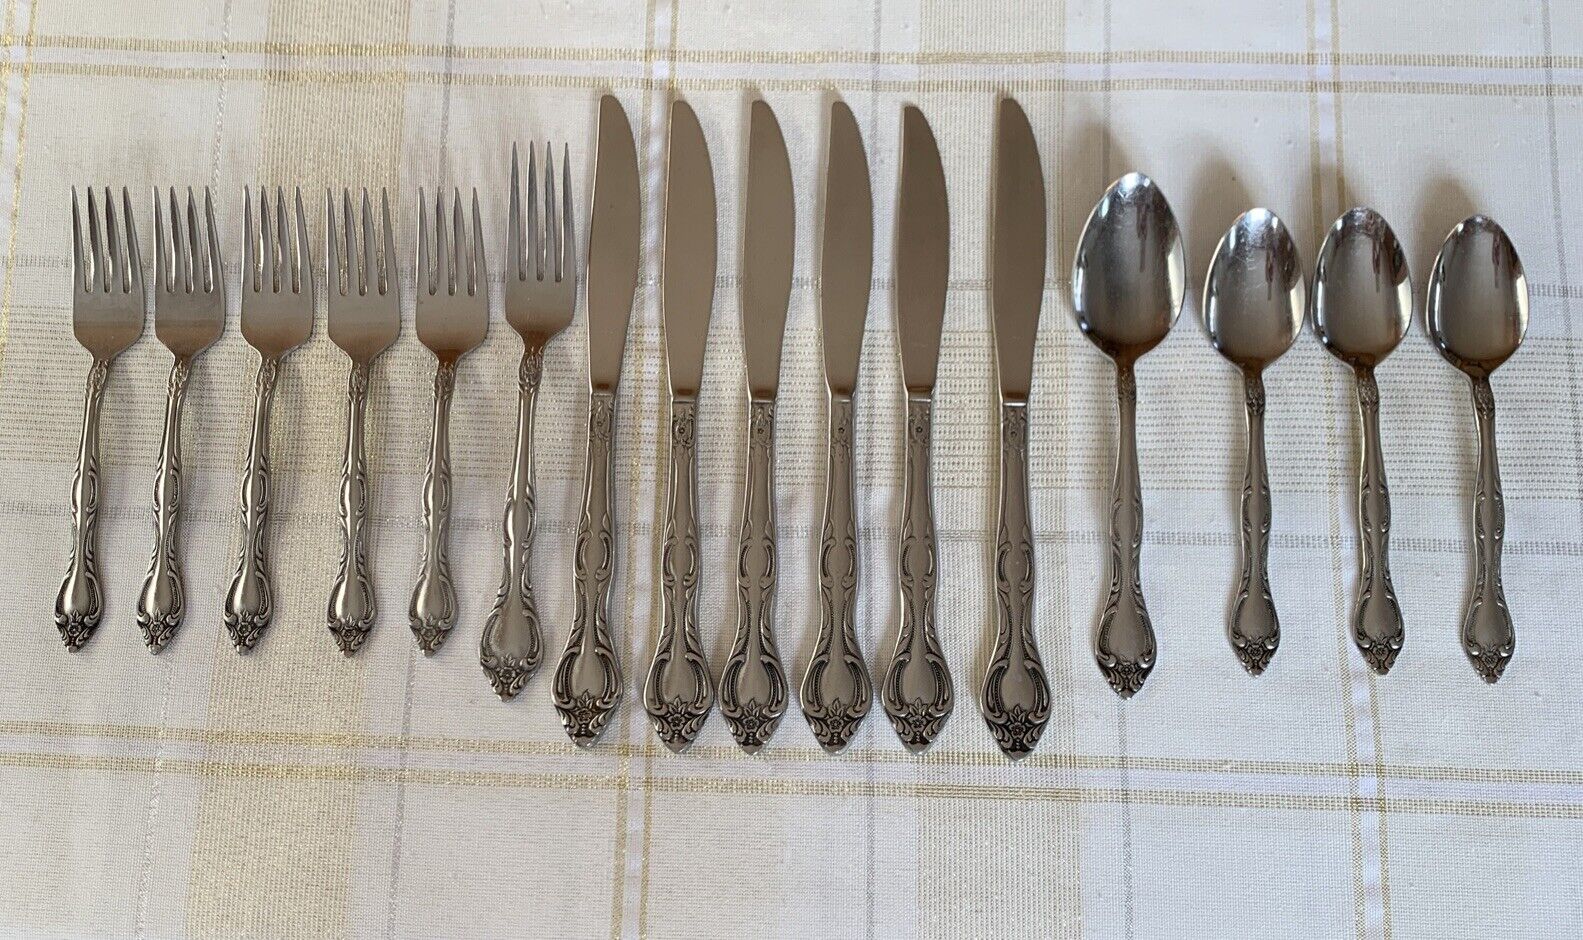 ROYAL BAROQUE IIC Imperial Flatware Korea Stainless Floral Scroll Edge IMIROB